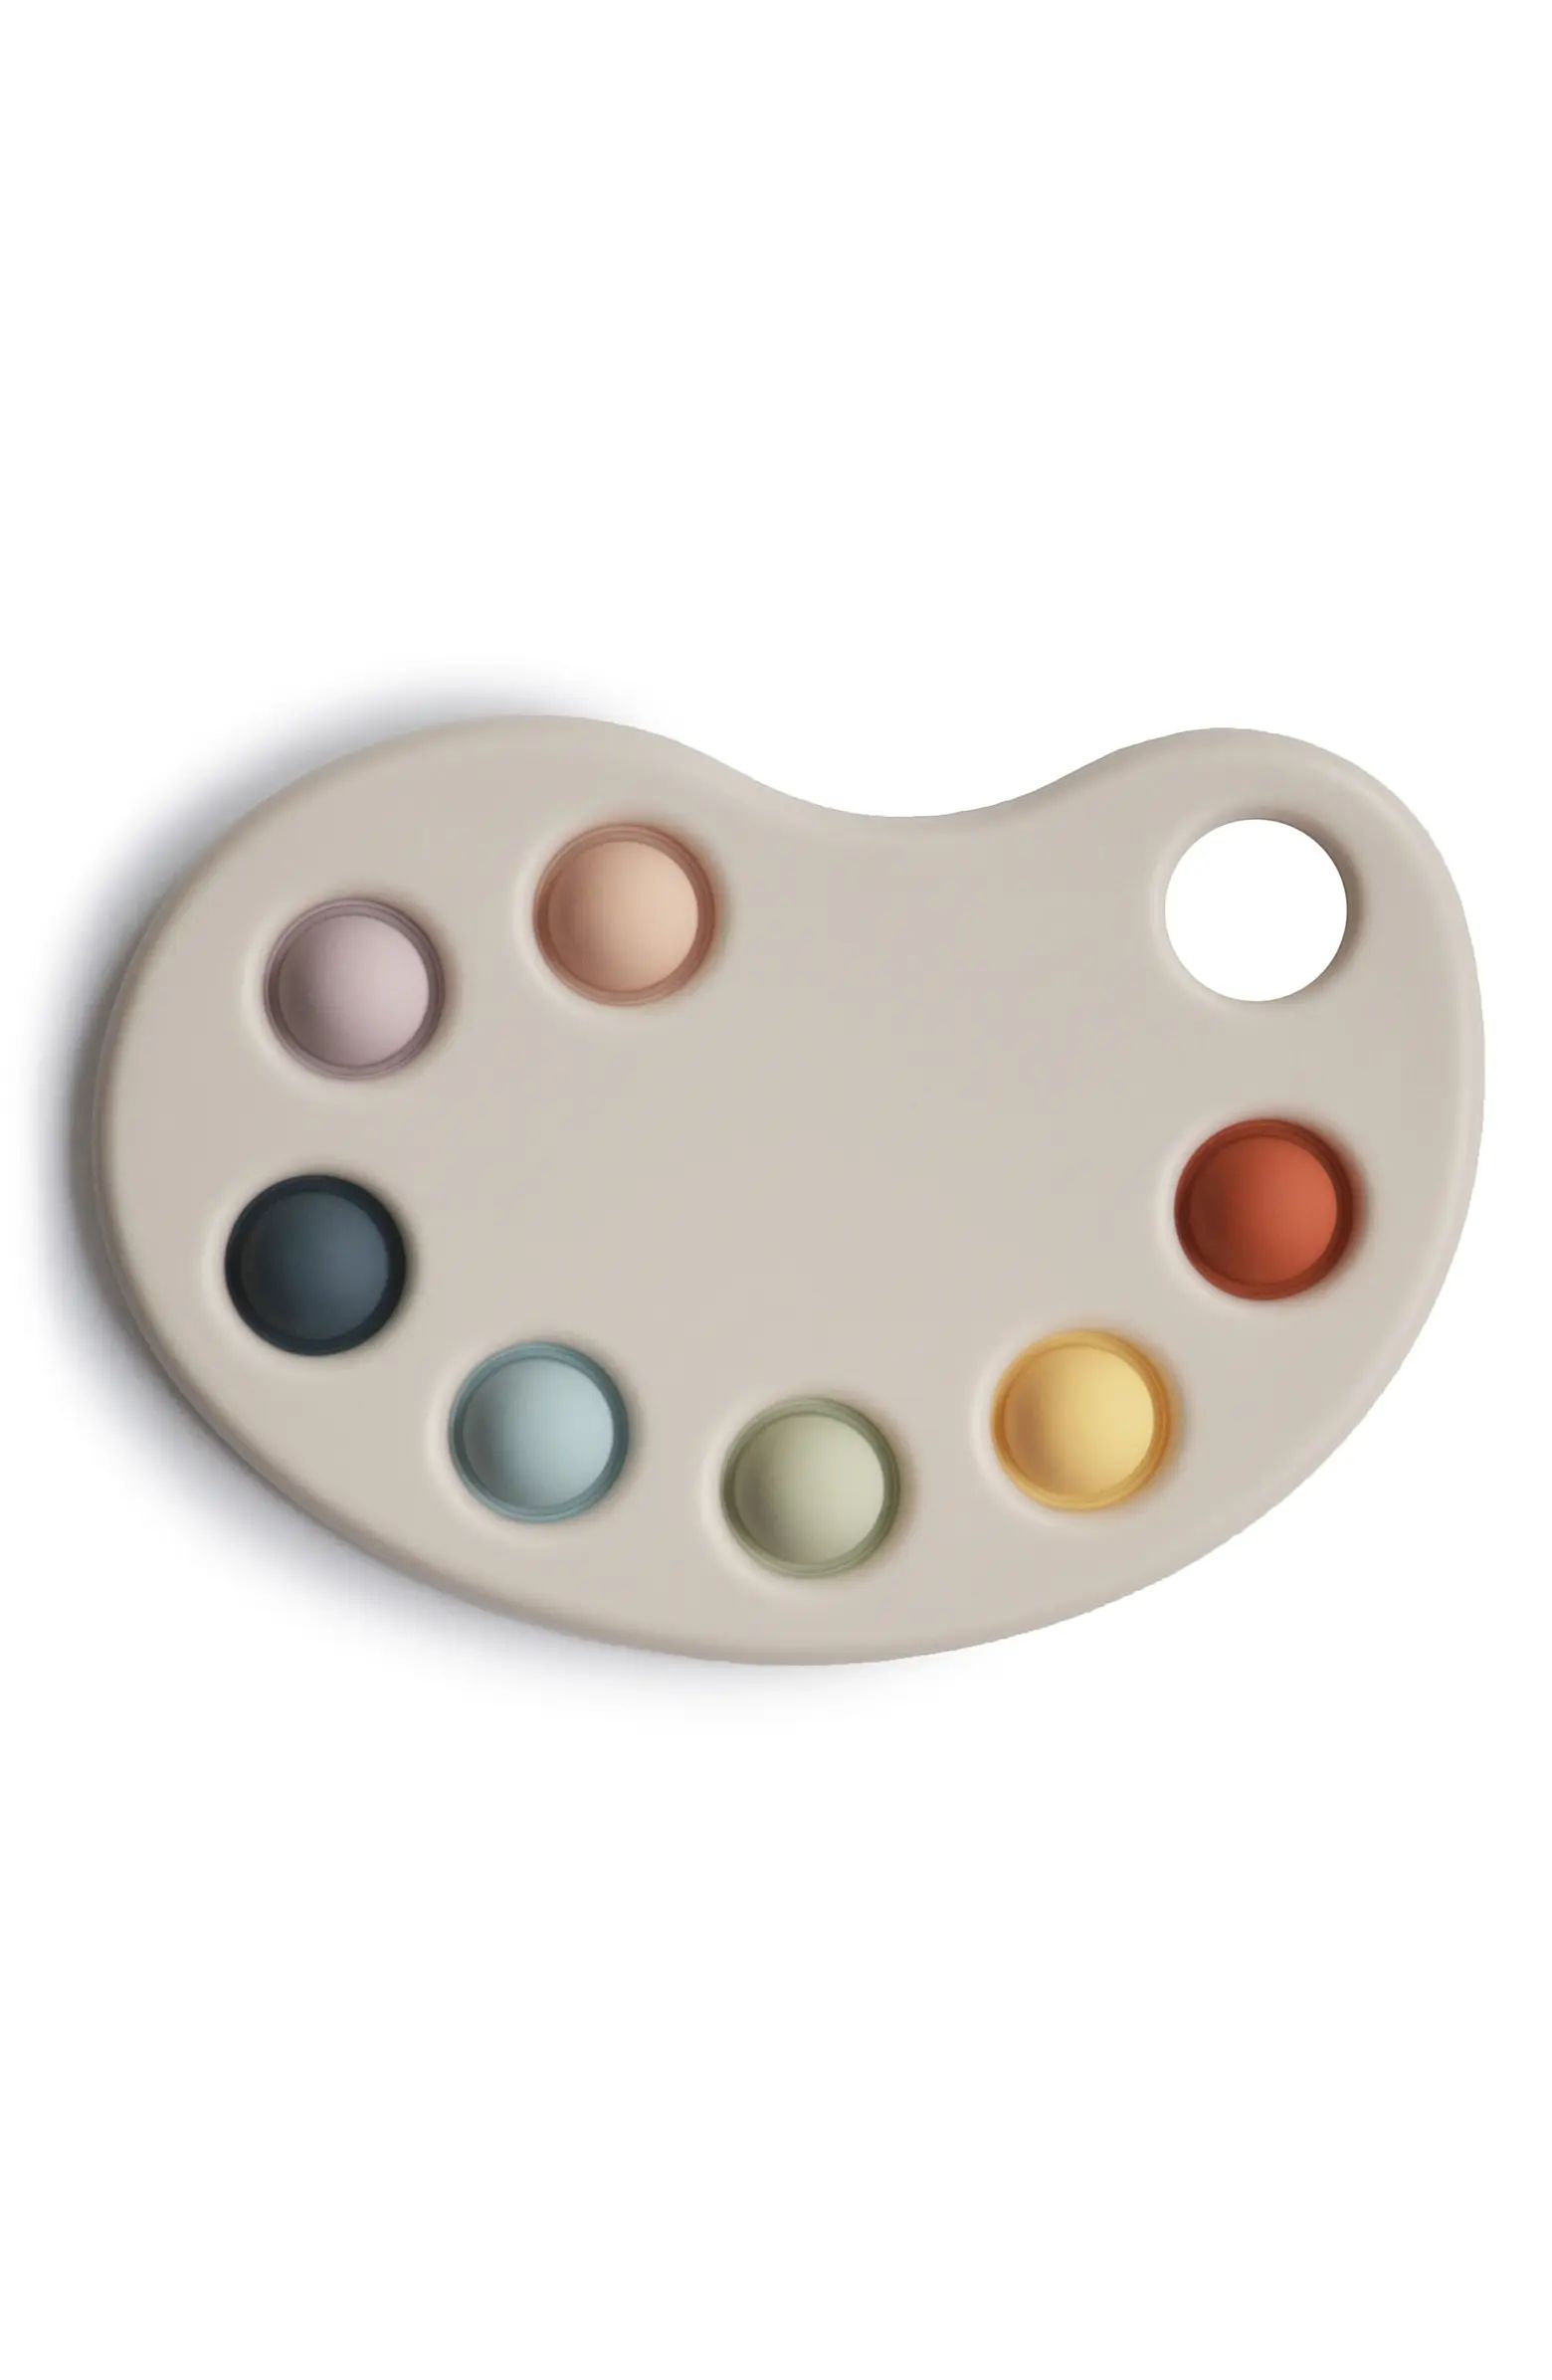 Paint Palette Press Teether Toy | Nordstrom